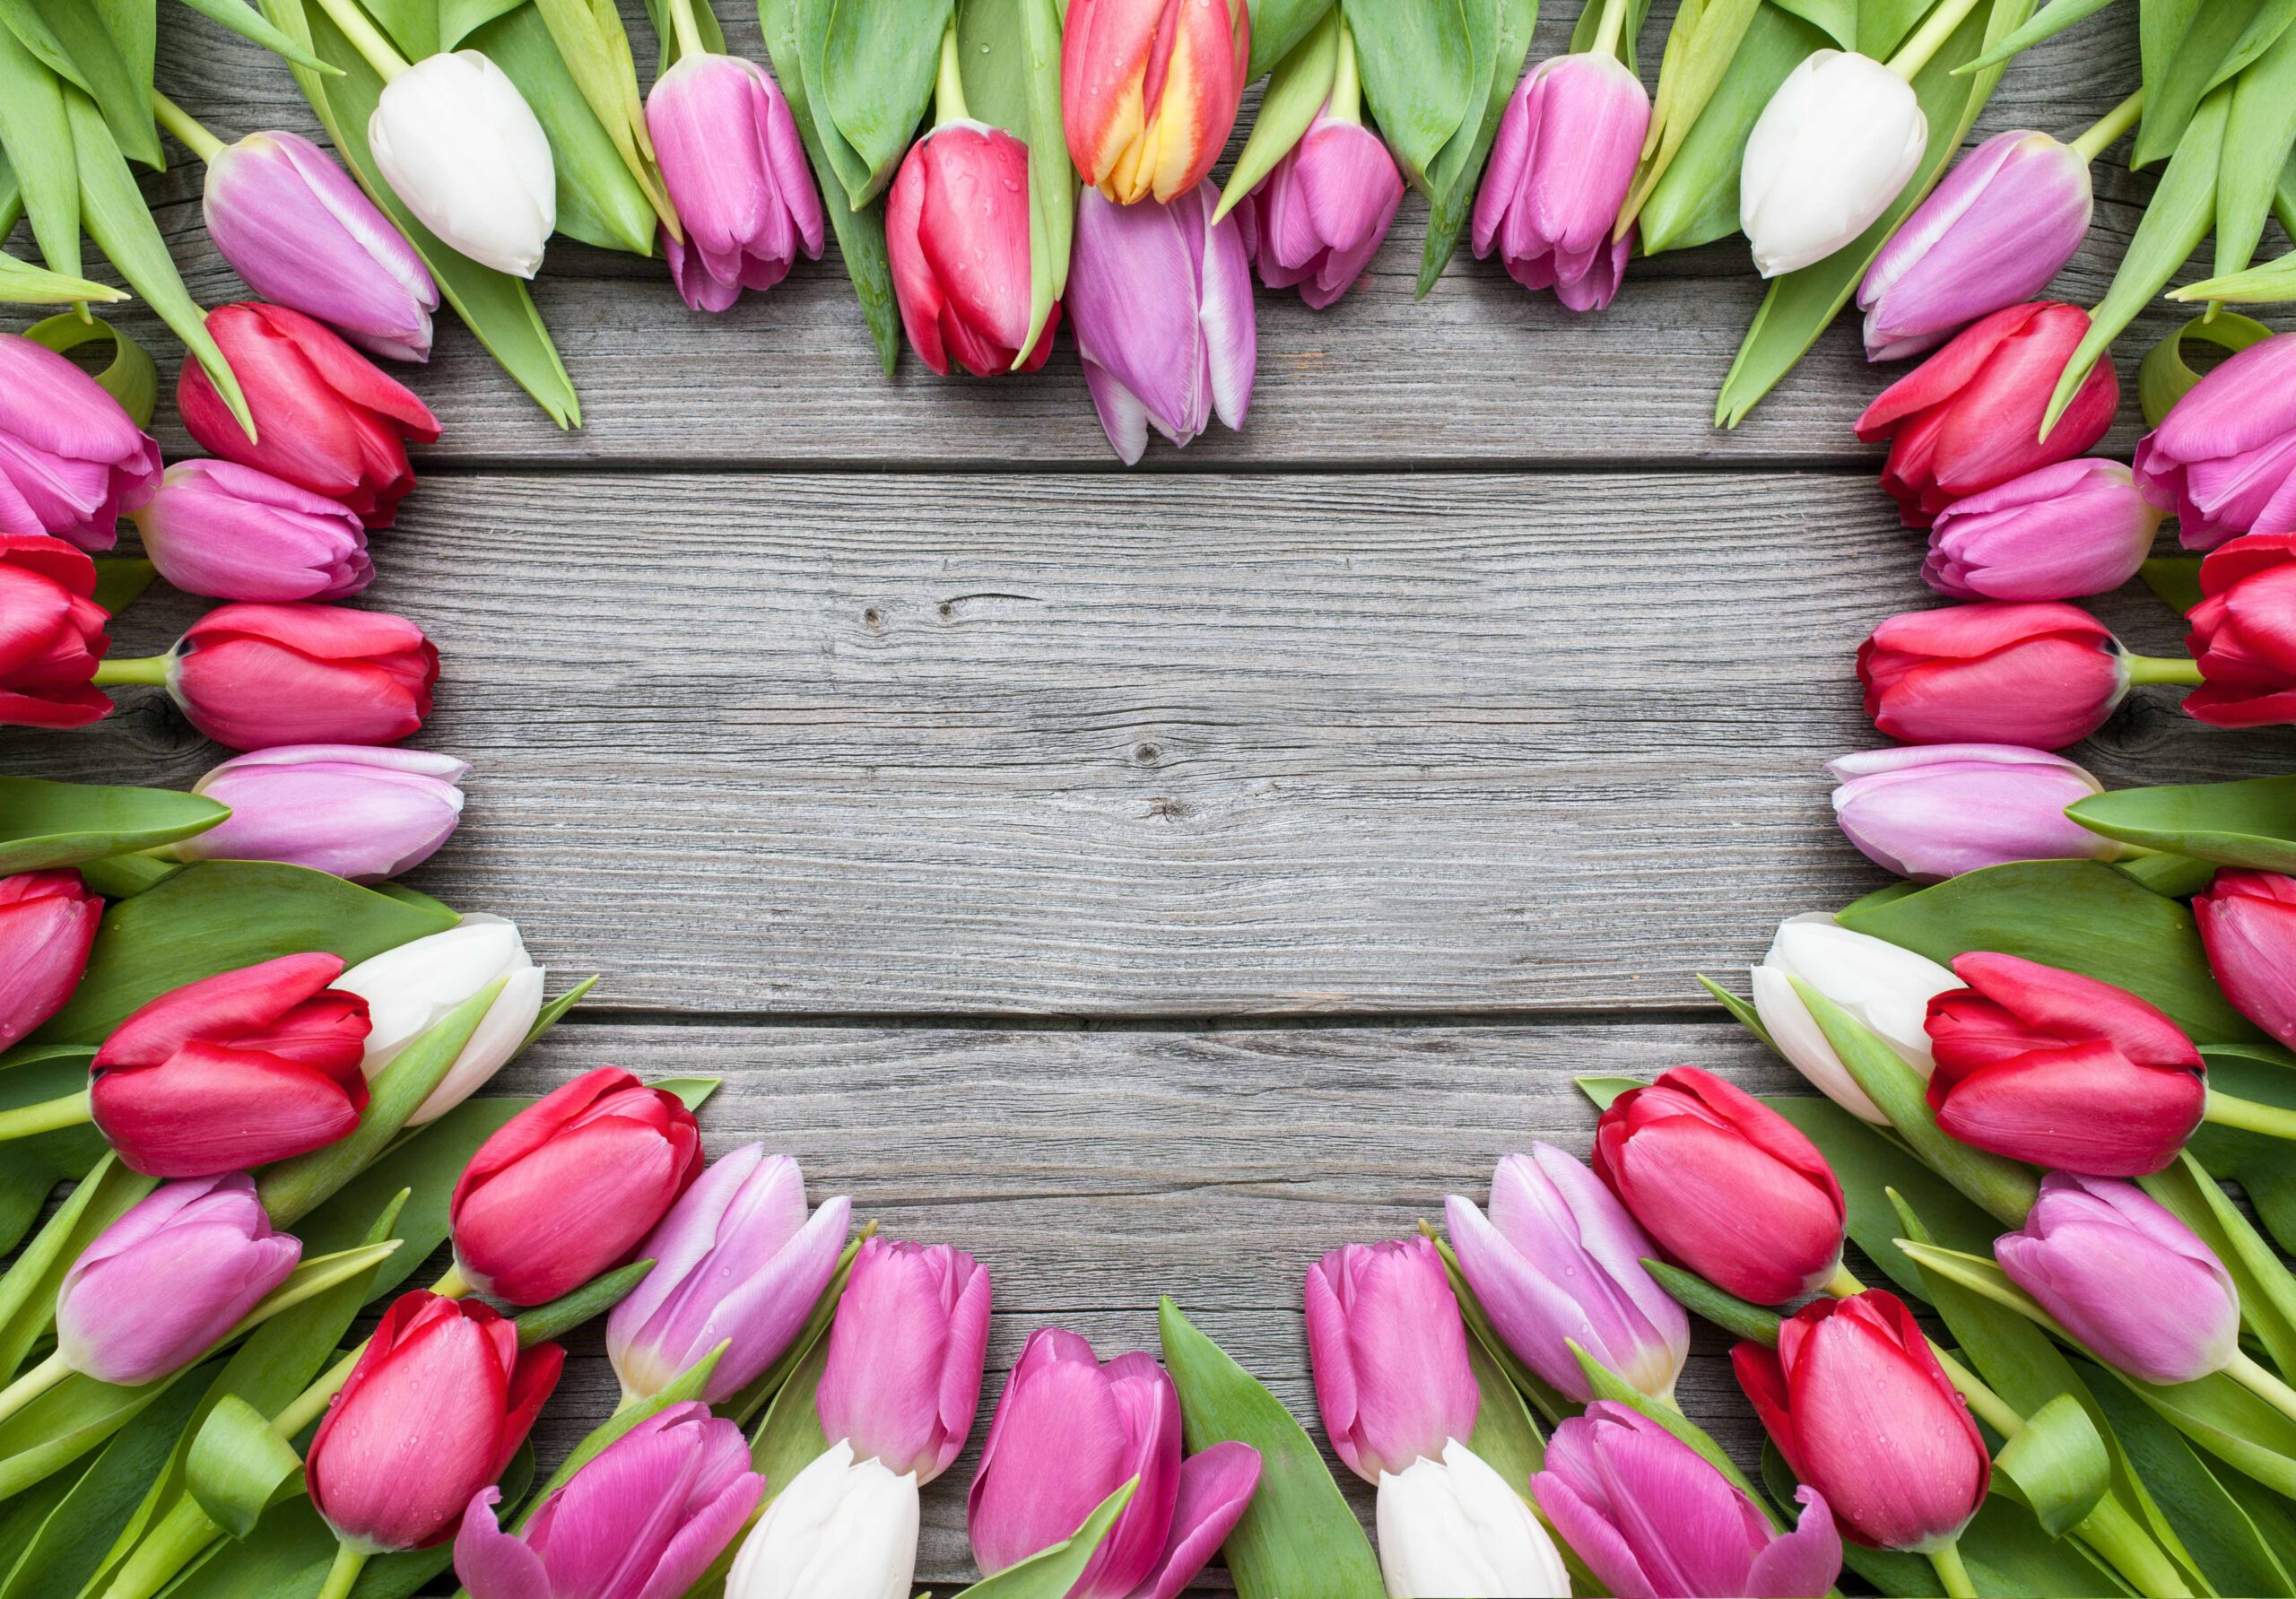 Frame of fresh tulips arranged in heart position on old wooden background